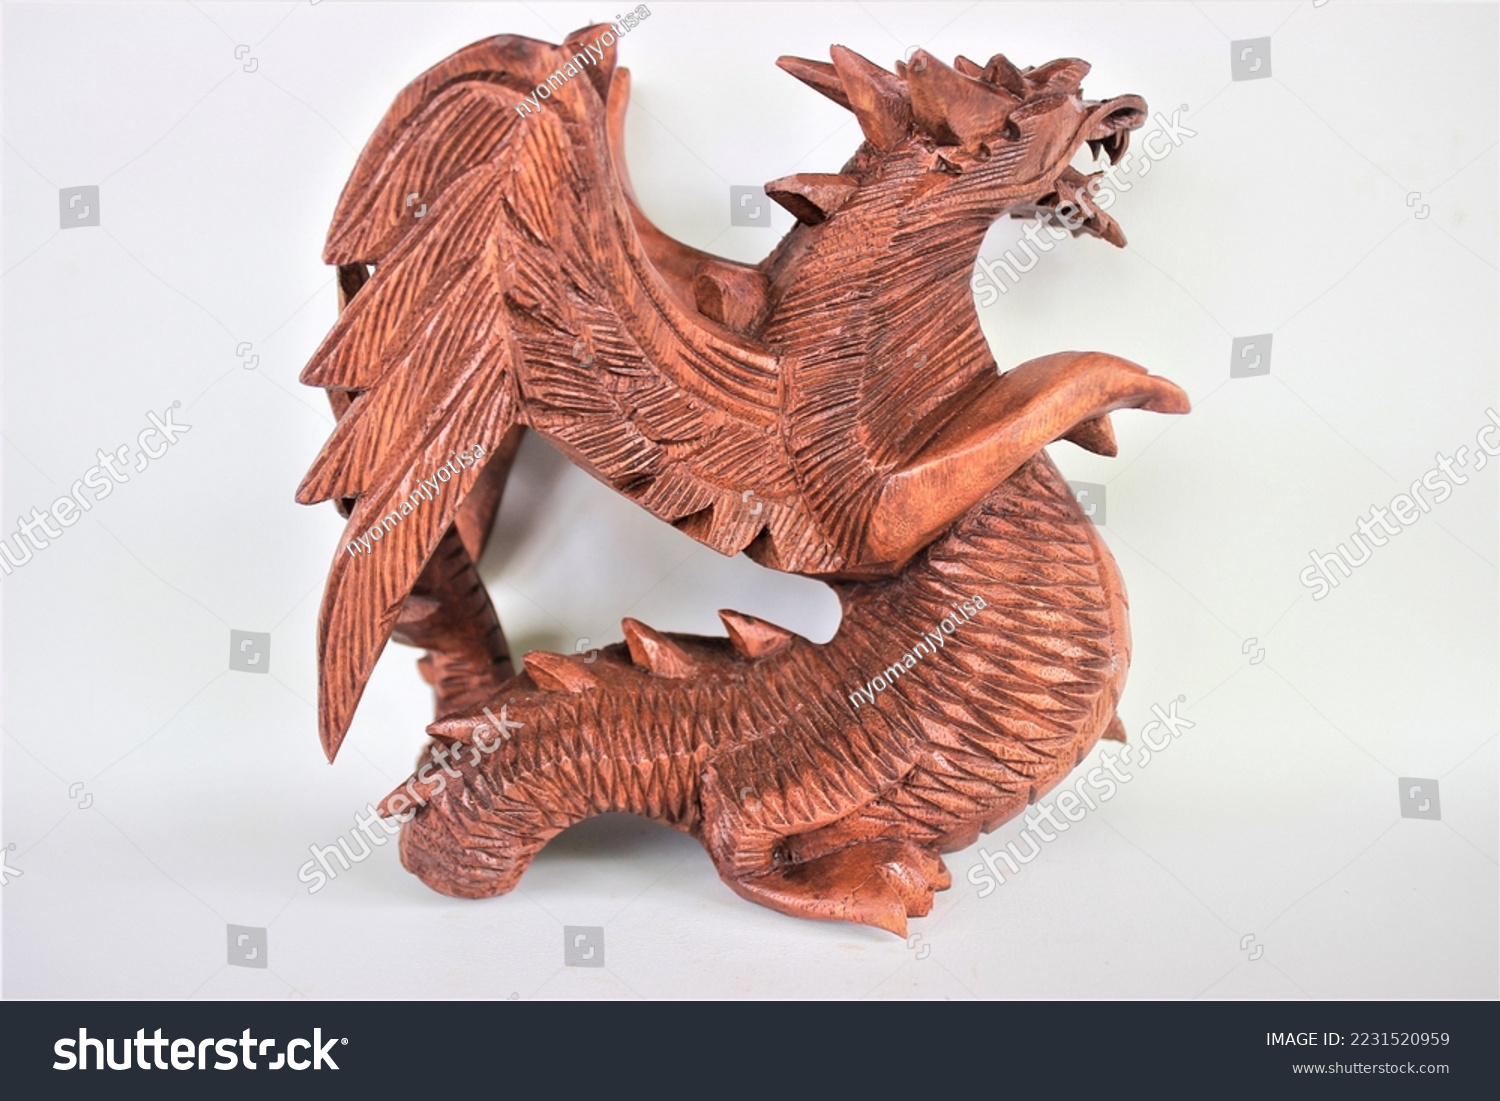 	
Wooden Dragon Sculpture Wood Carving, Sculpture, Art from Bali Indonesia #2231520959